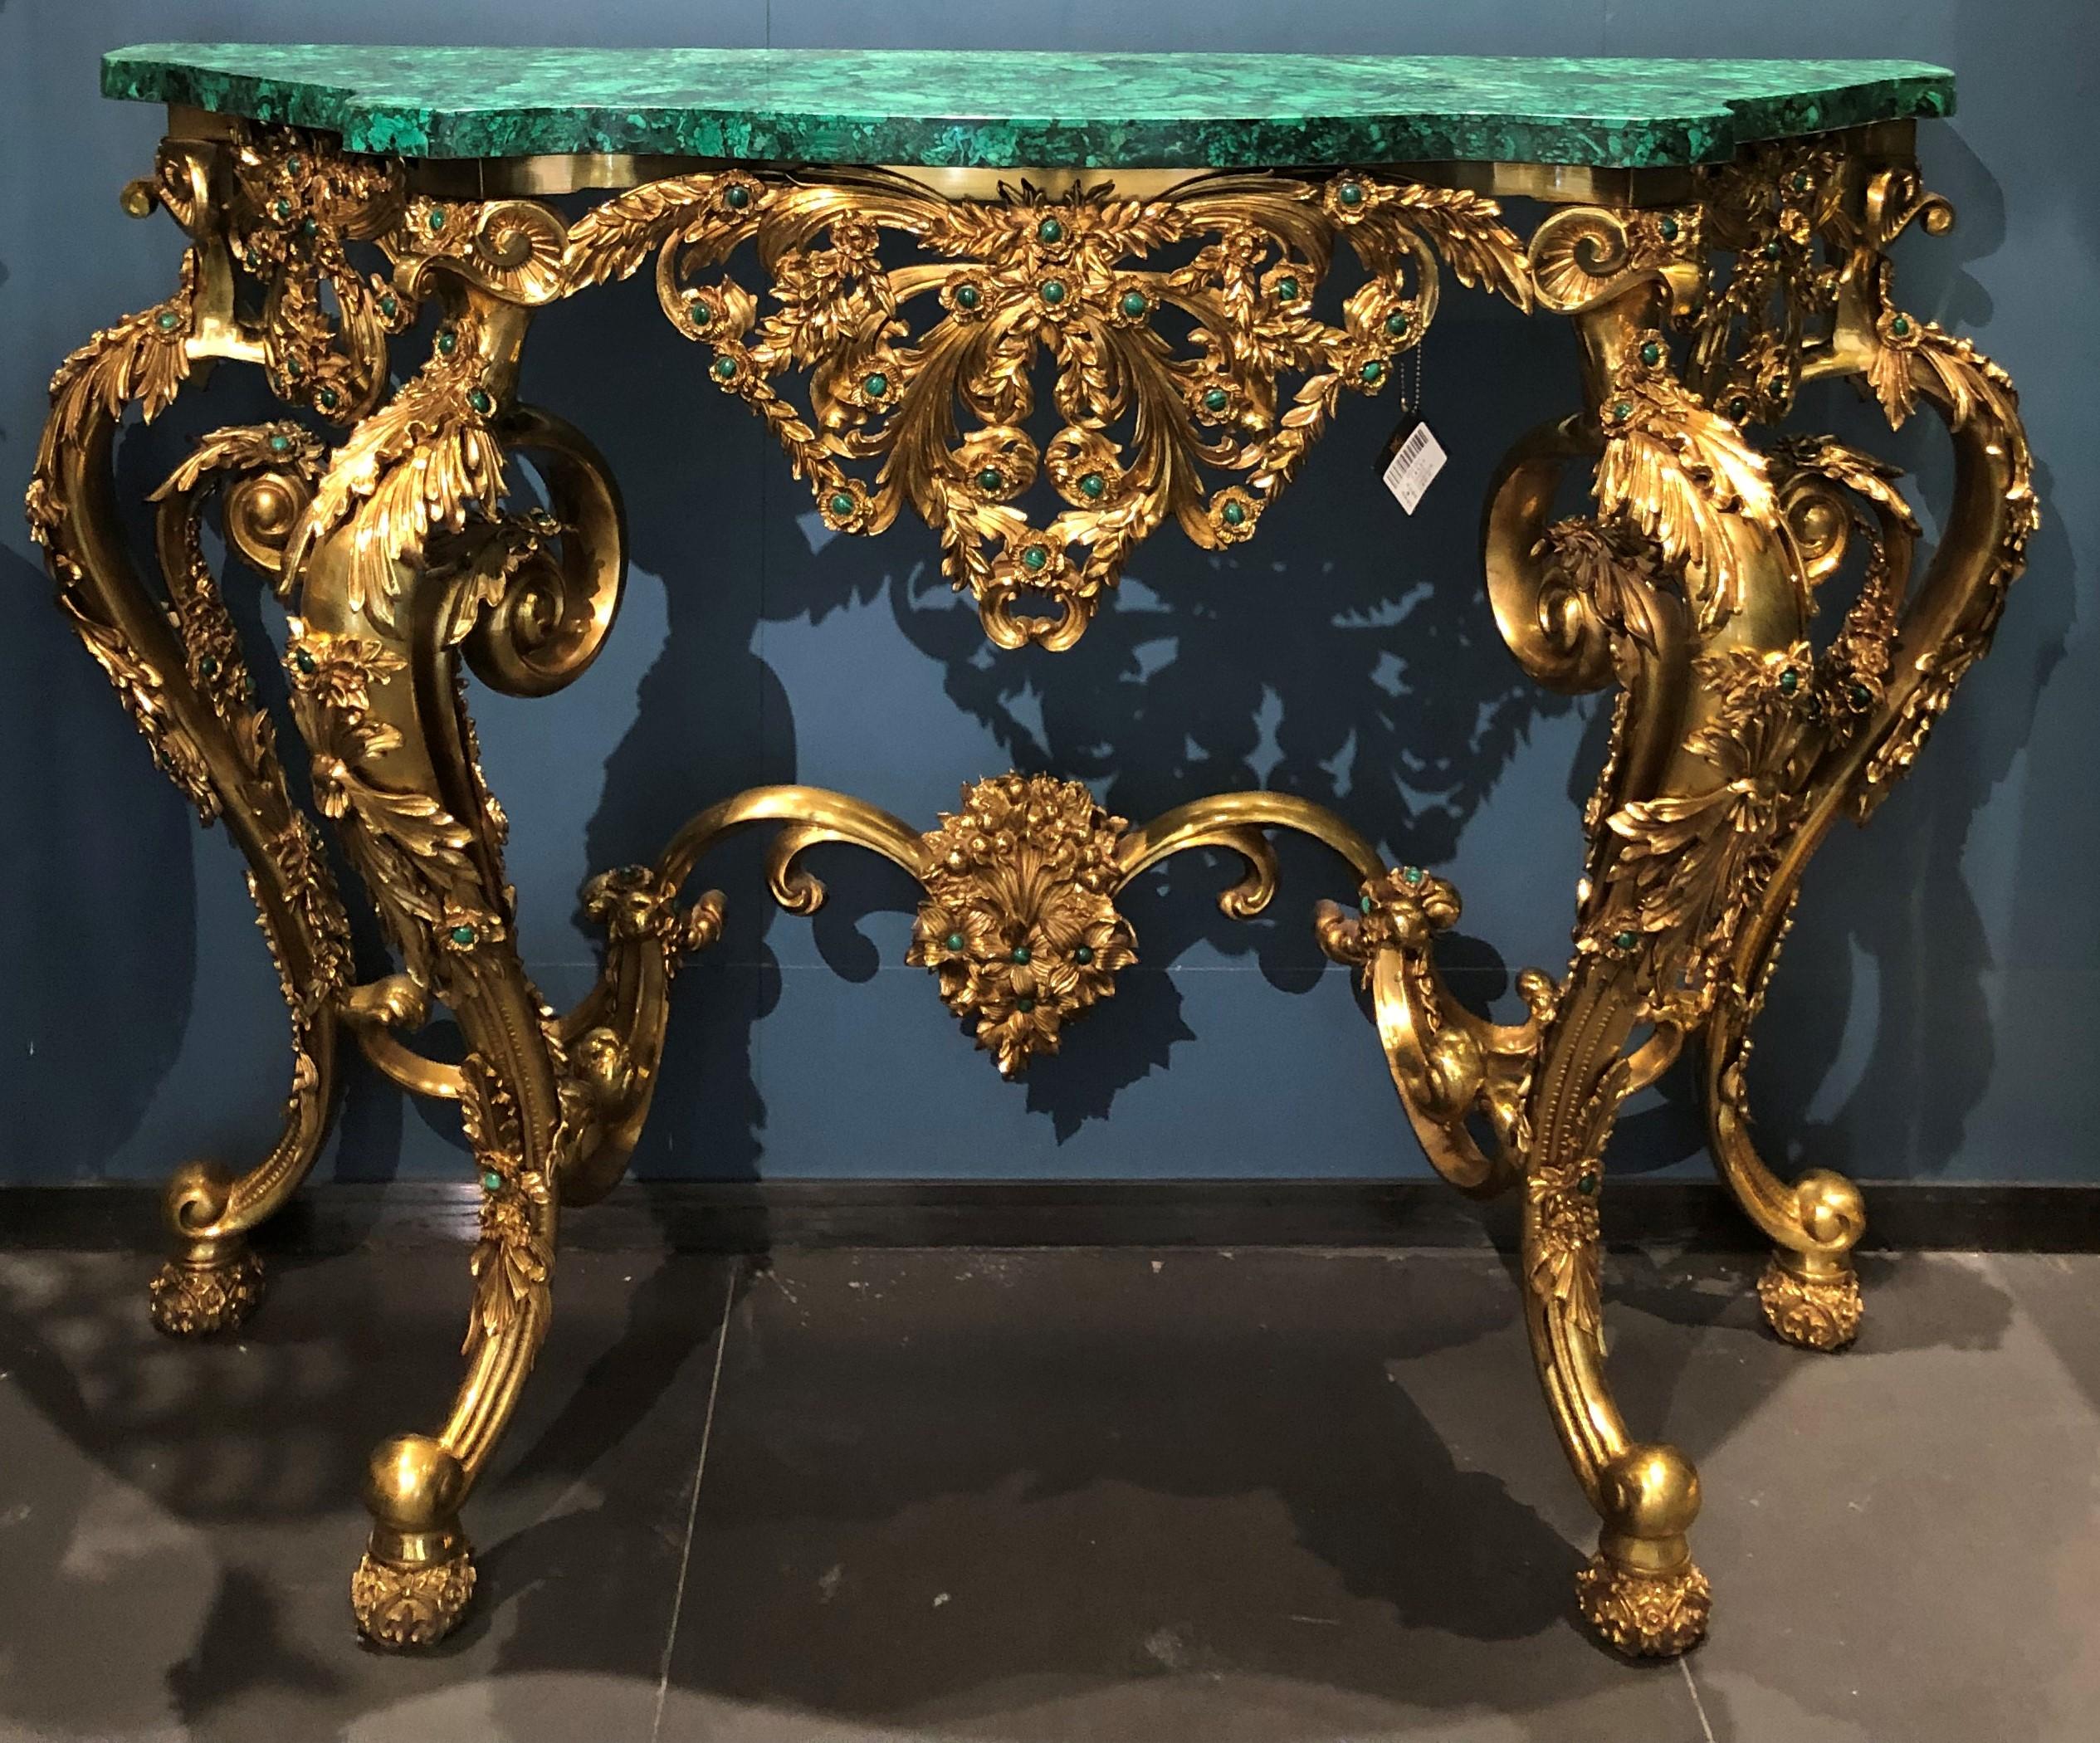 Bronze porch table with Malachite by ARTISS
Dimensions: L 125 x W 50 x H 92 cm
Materials: Malachite, bronze

ARTIS is named from artist, whose two -S